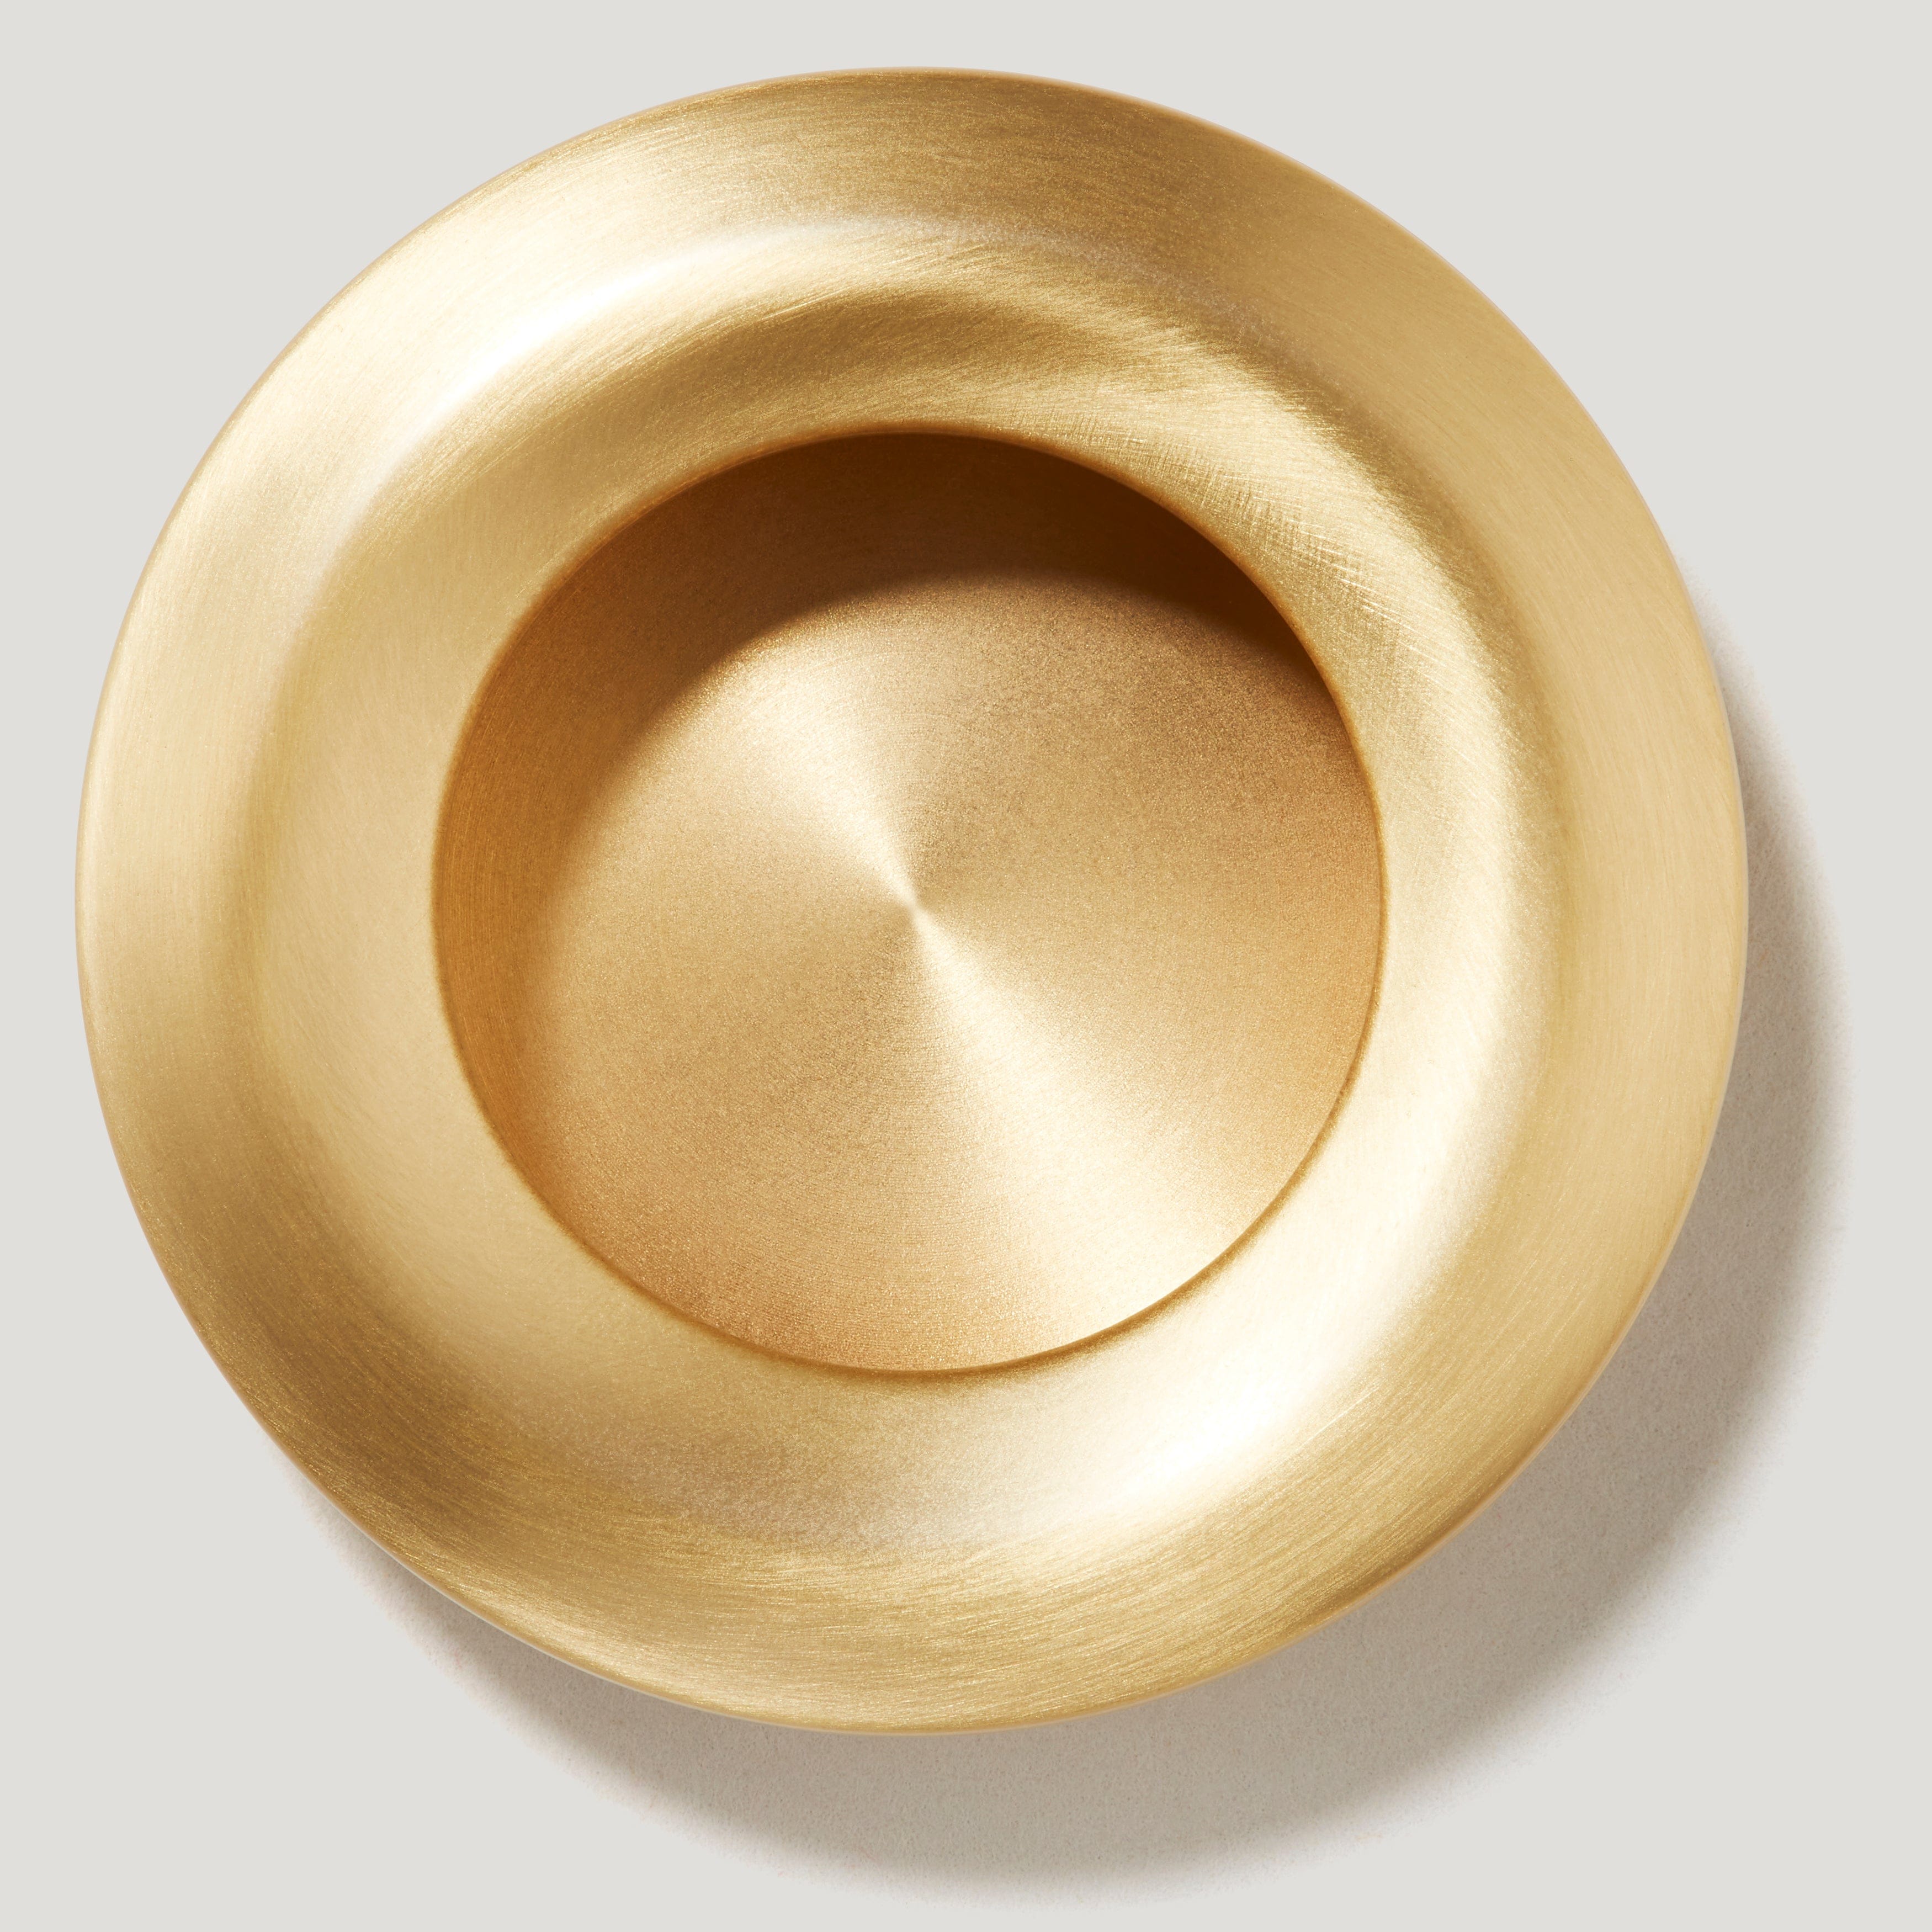 Plank Hardware OLMO Round Recessed Pull Handle - Brass